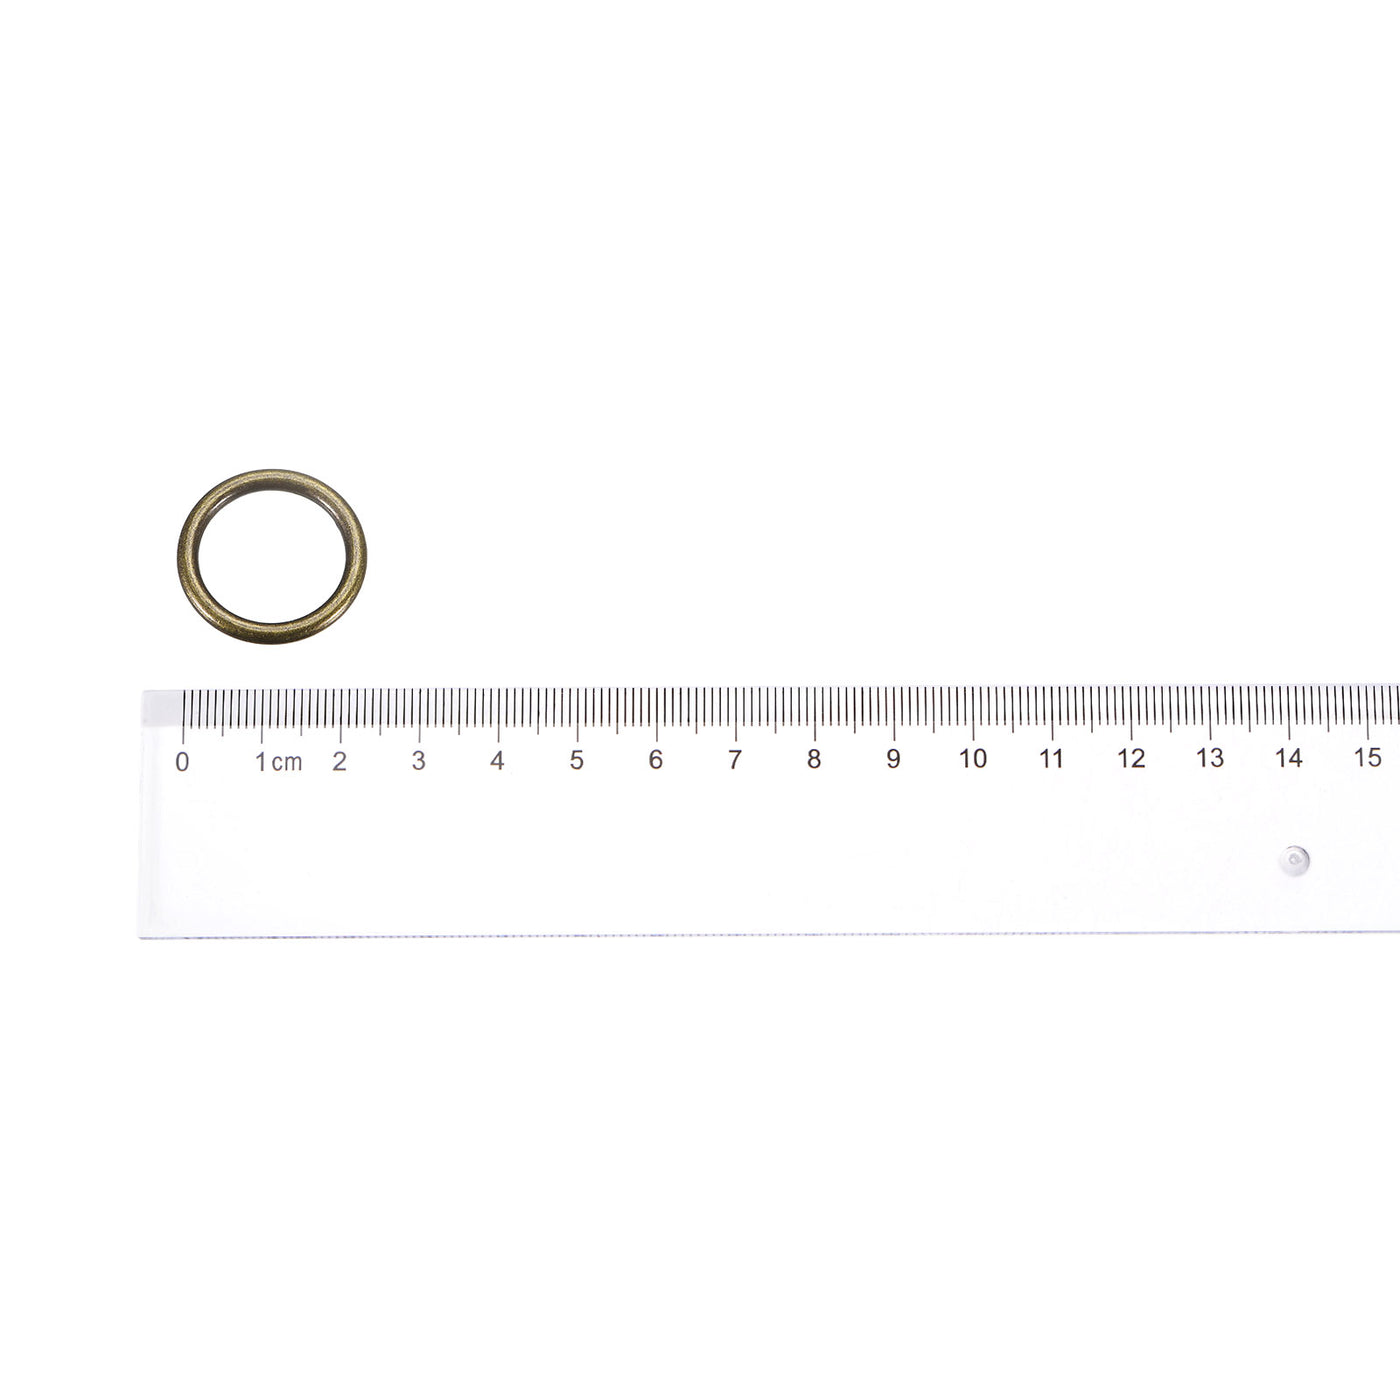 uxcell Uxcell Metal O Rings, 15pcs 20mm(0.79") ID 3mm Thick Welded O-Ringe, Bronze Tone